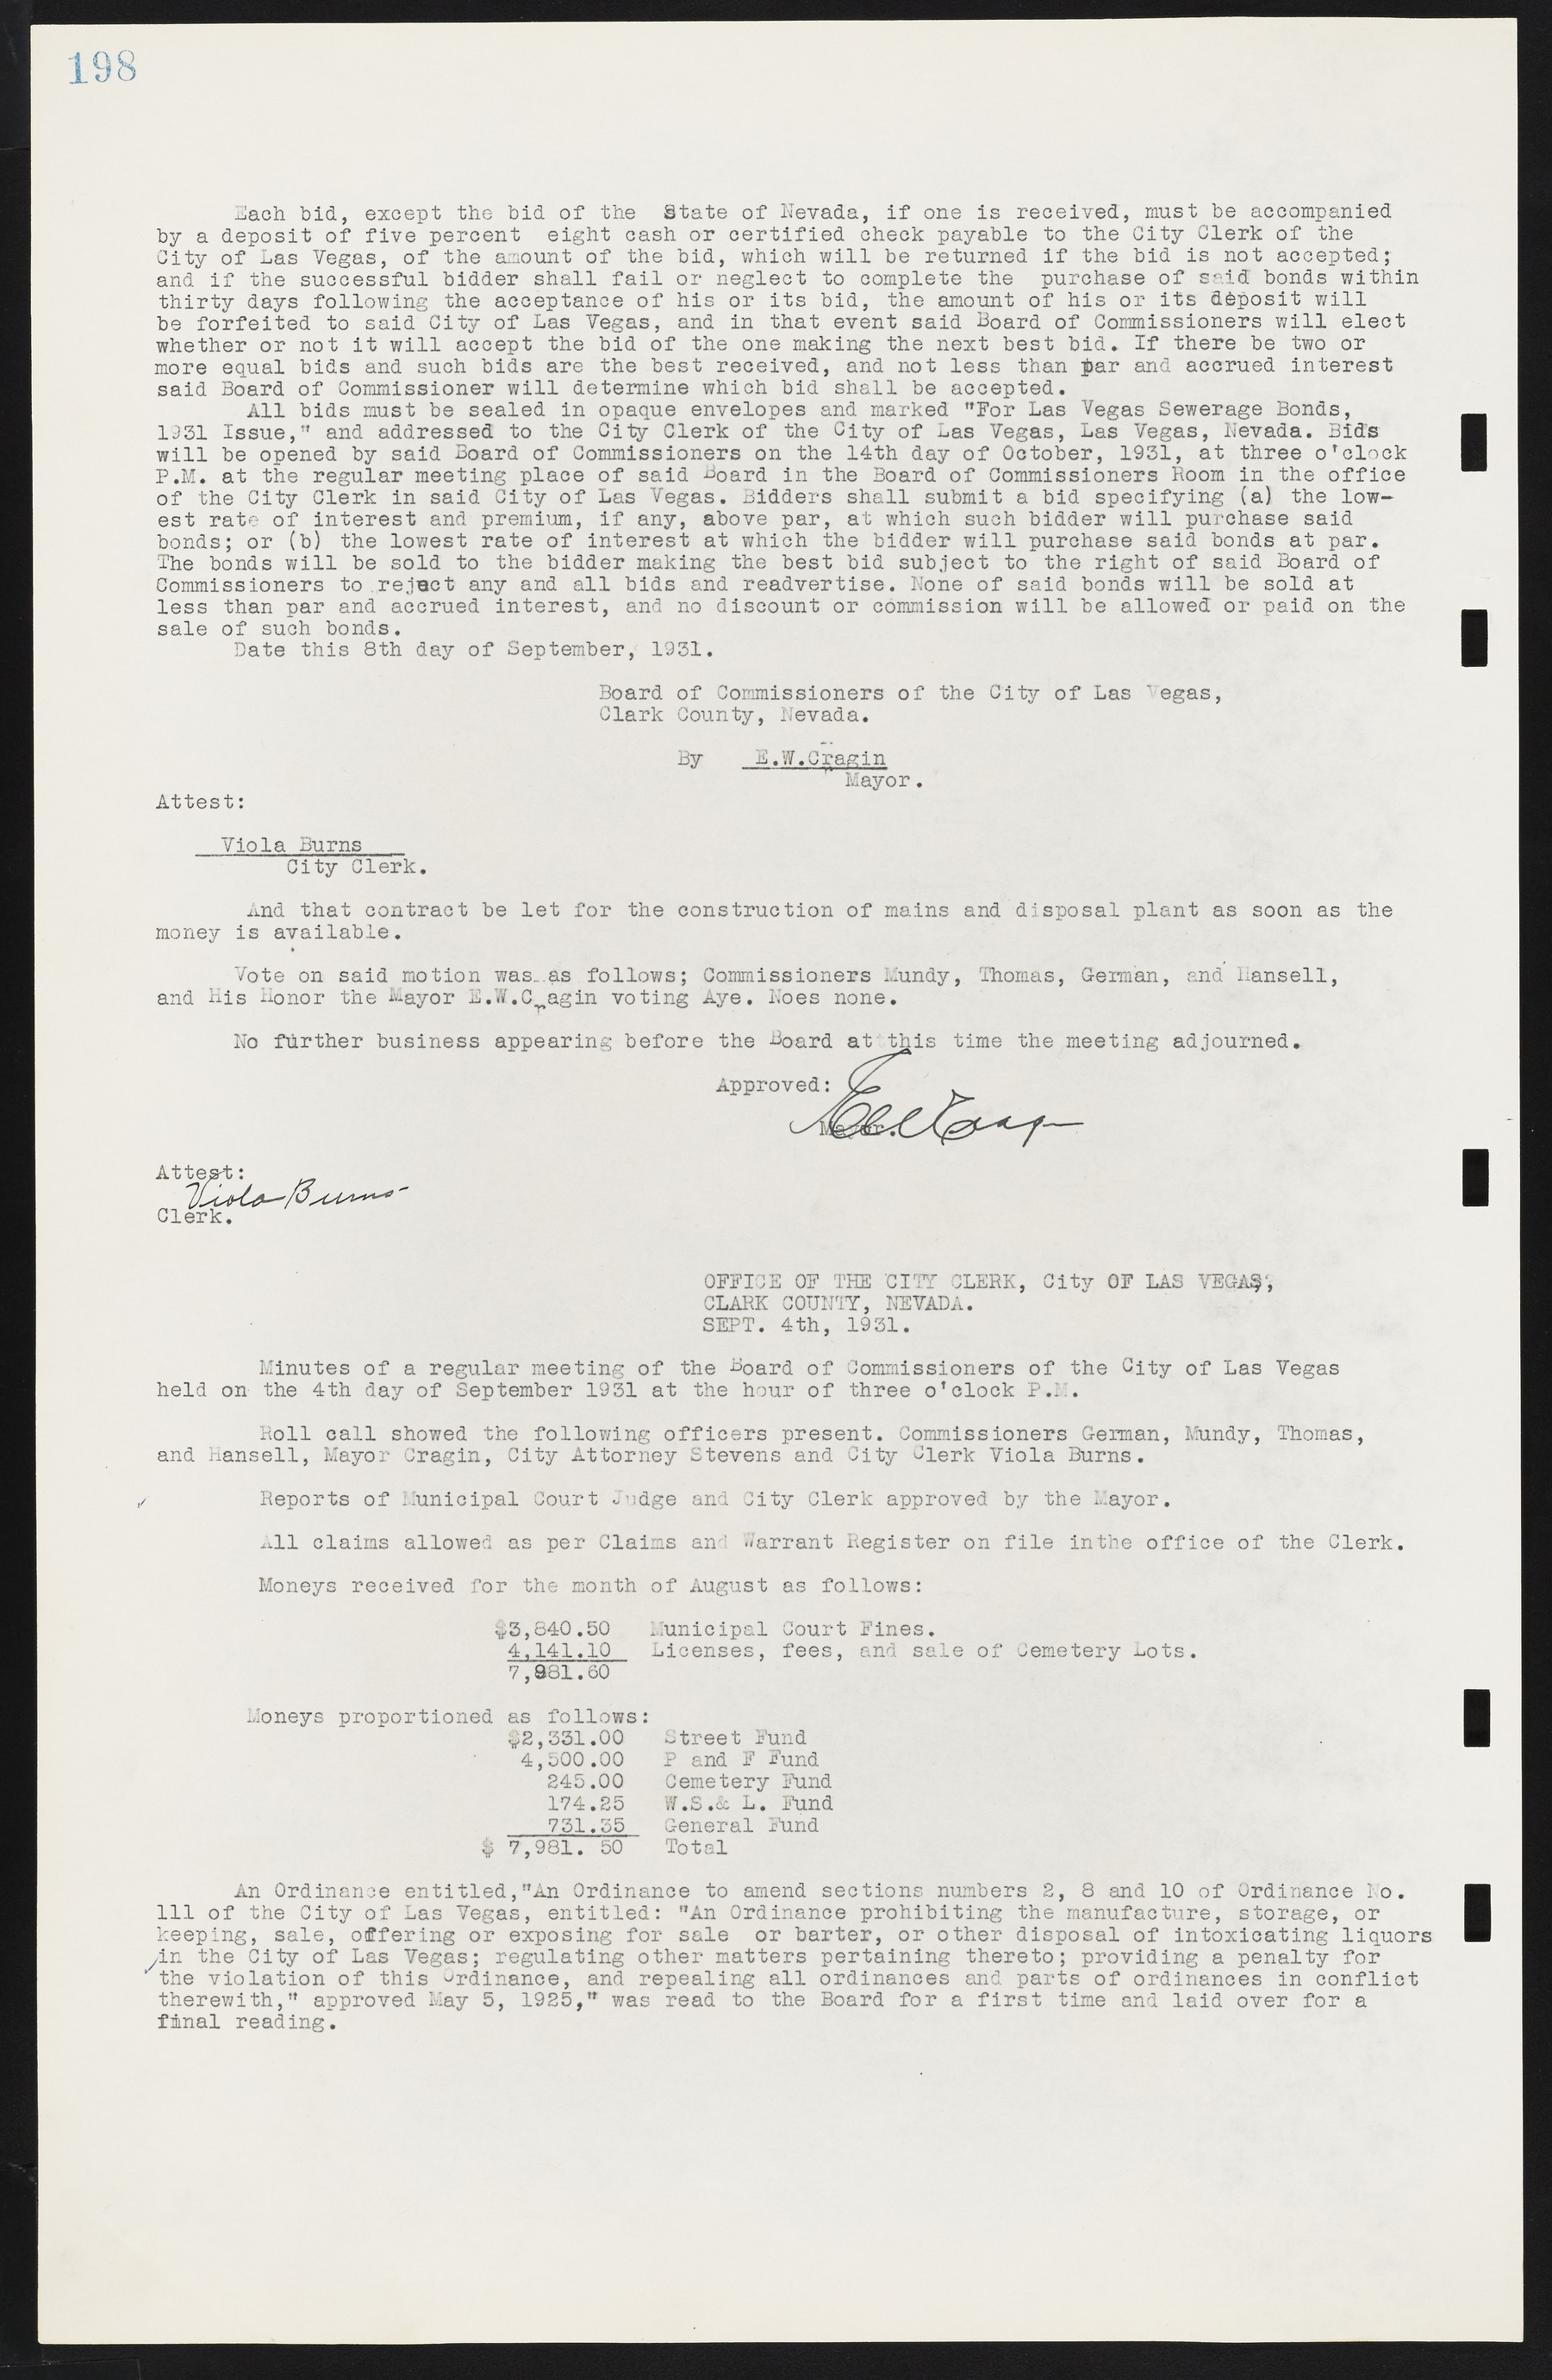 Las Vegas City Commission Minutes, May 14, 1929 to February 11, 1937, lvc000003-204